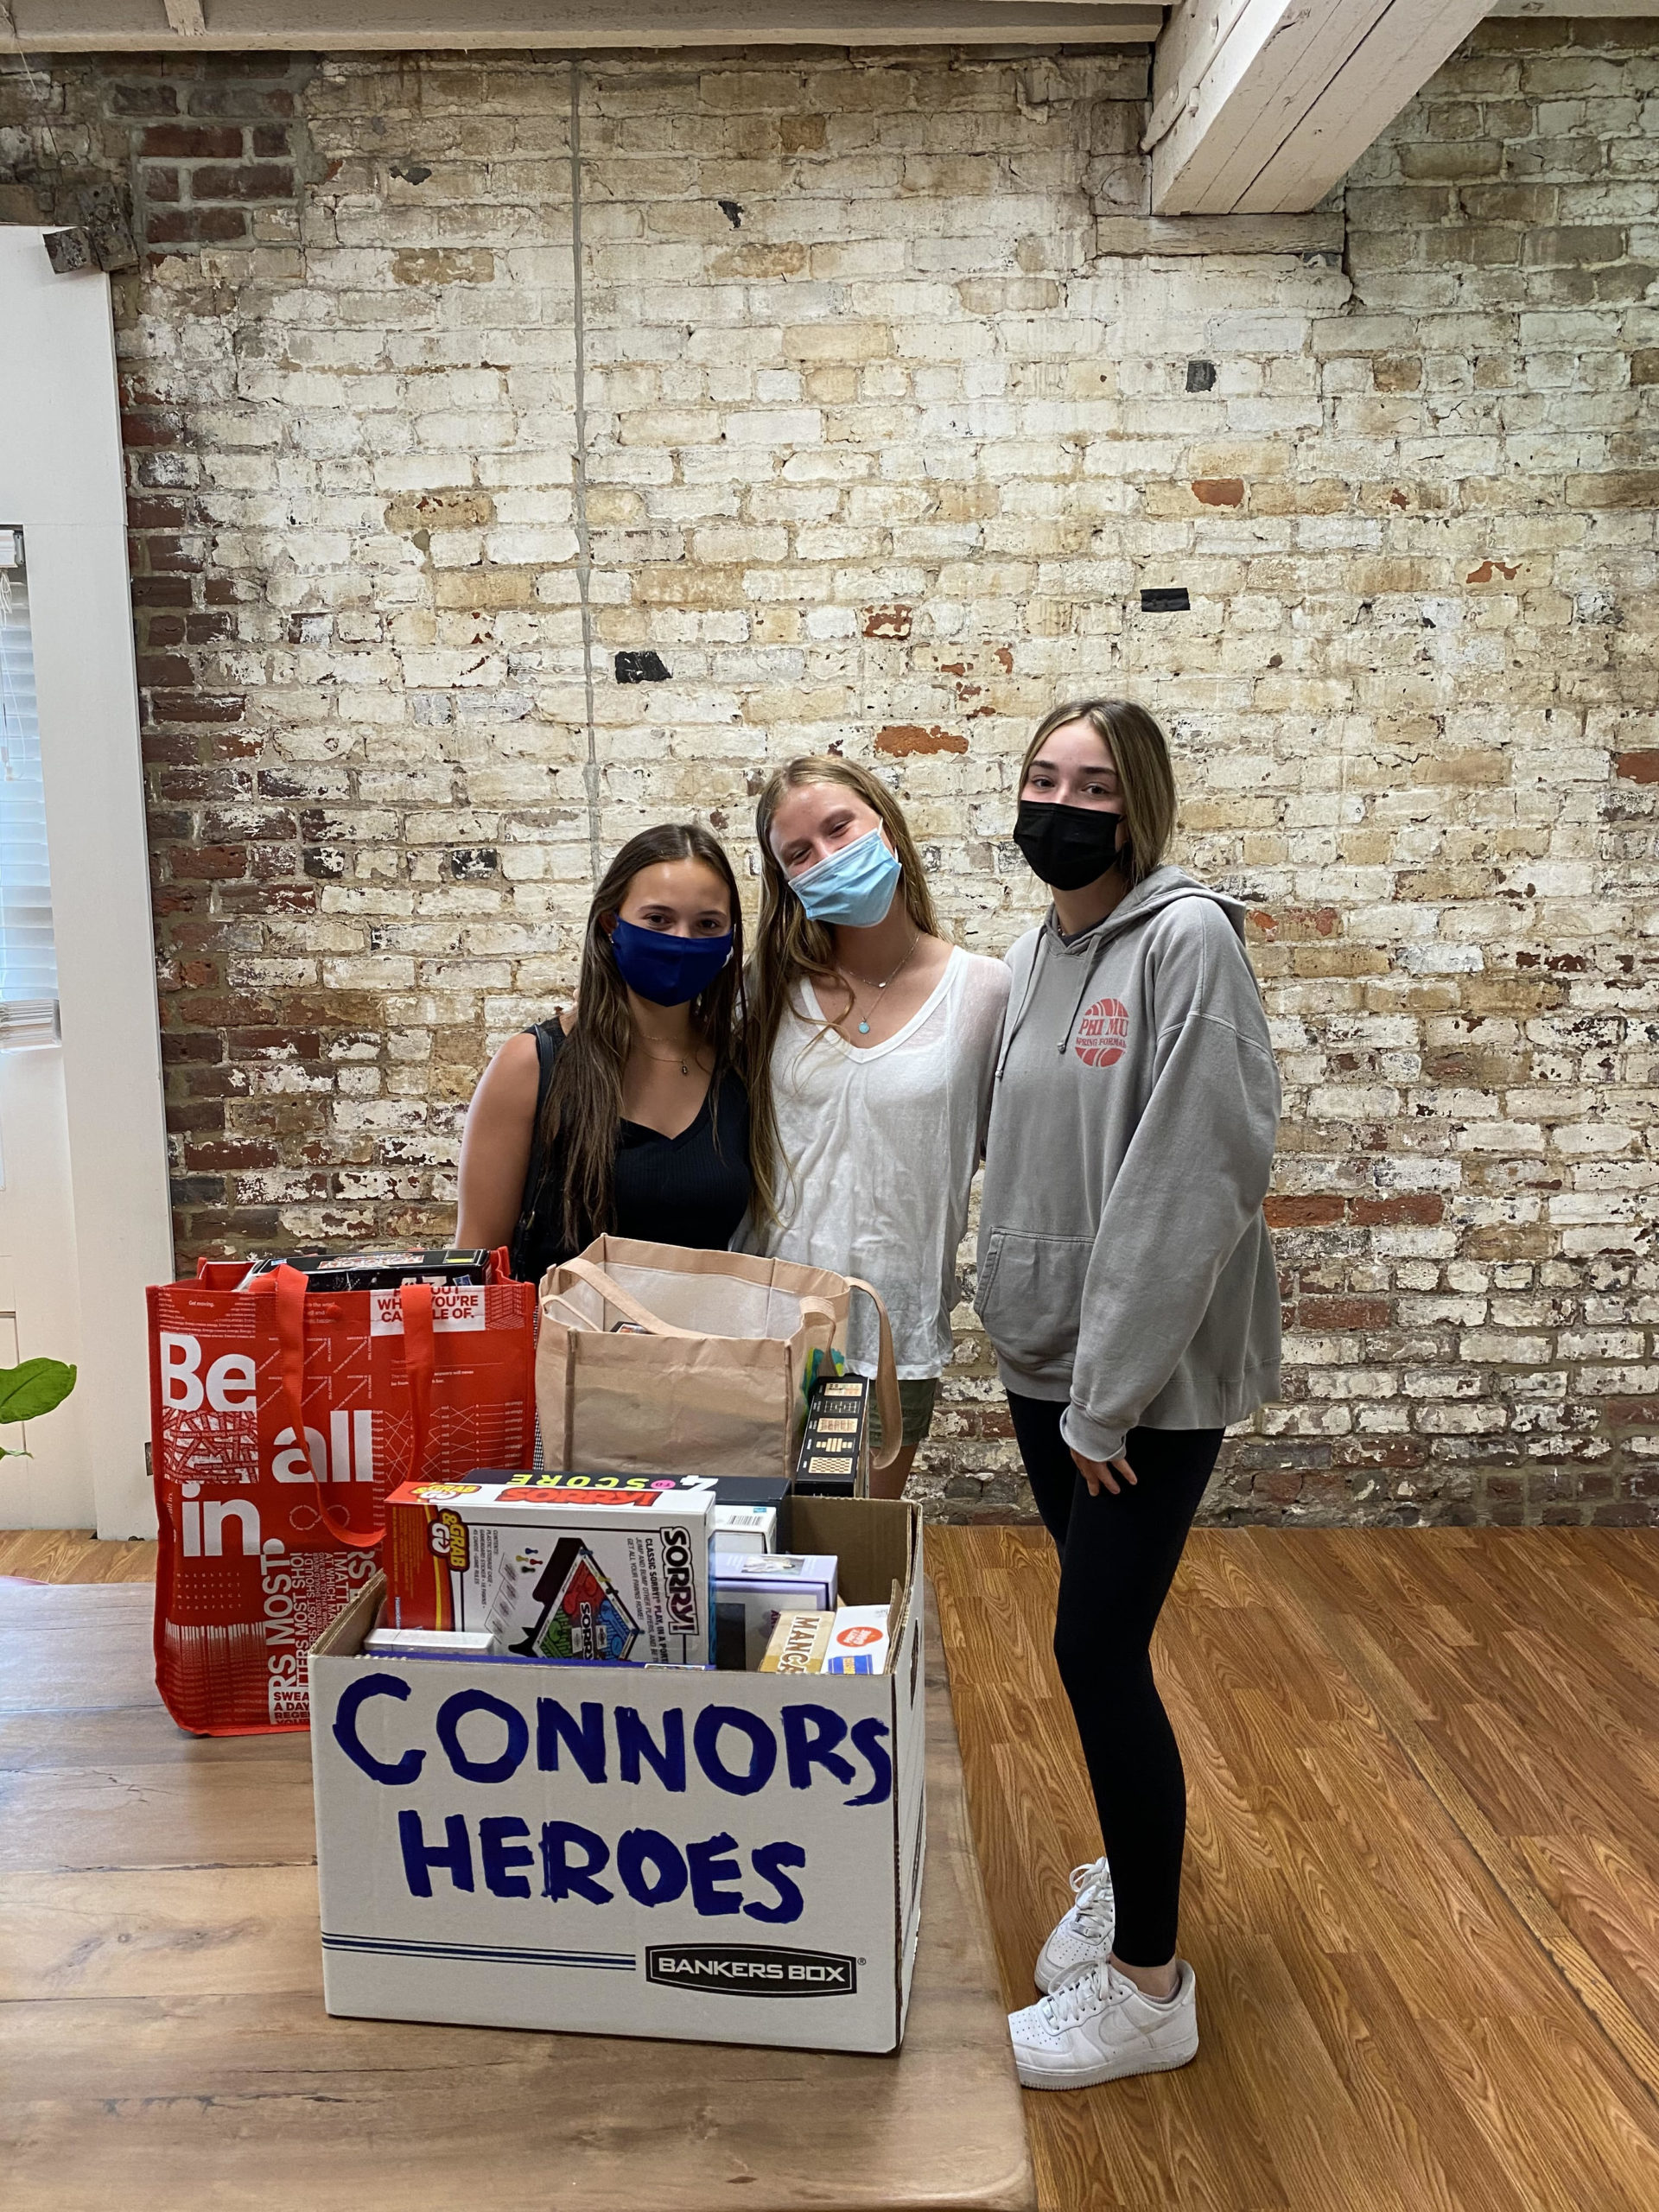 Image three teenagers wearing masks standing behind a table with a box full of board games